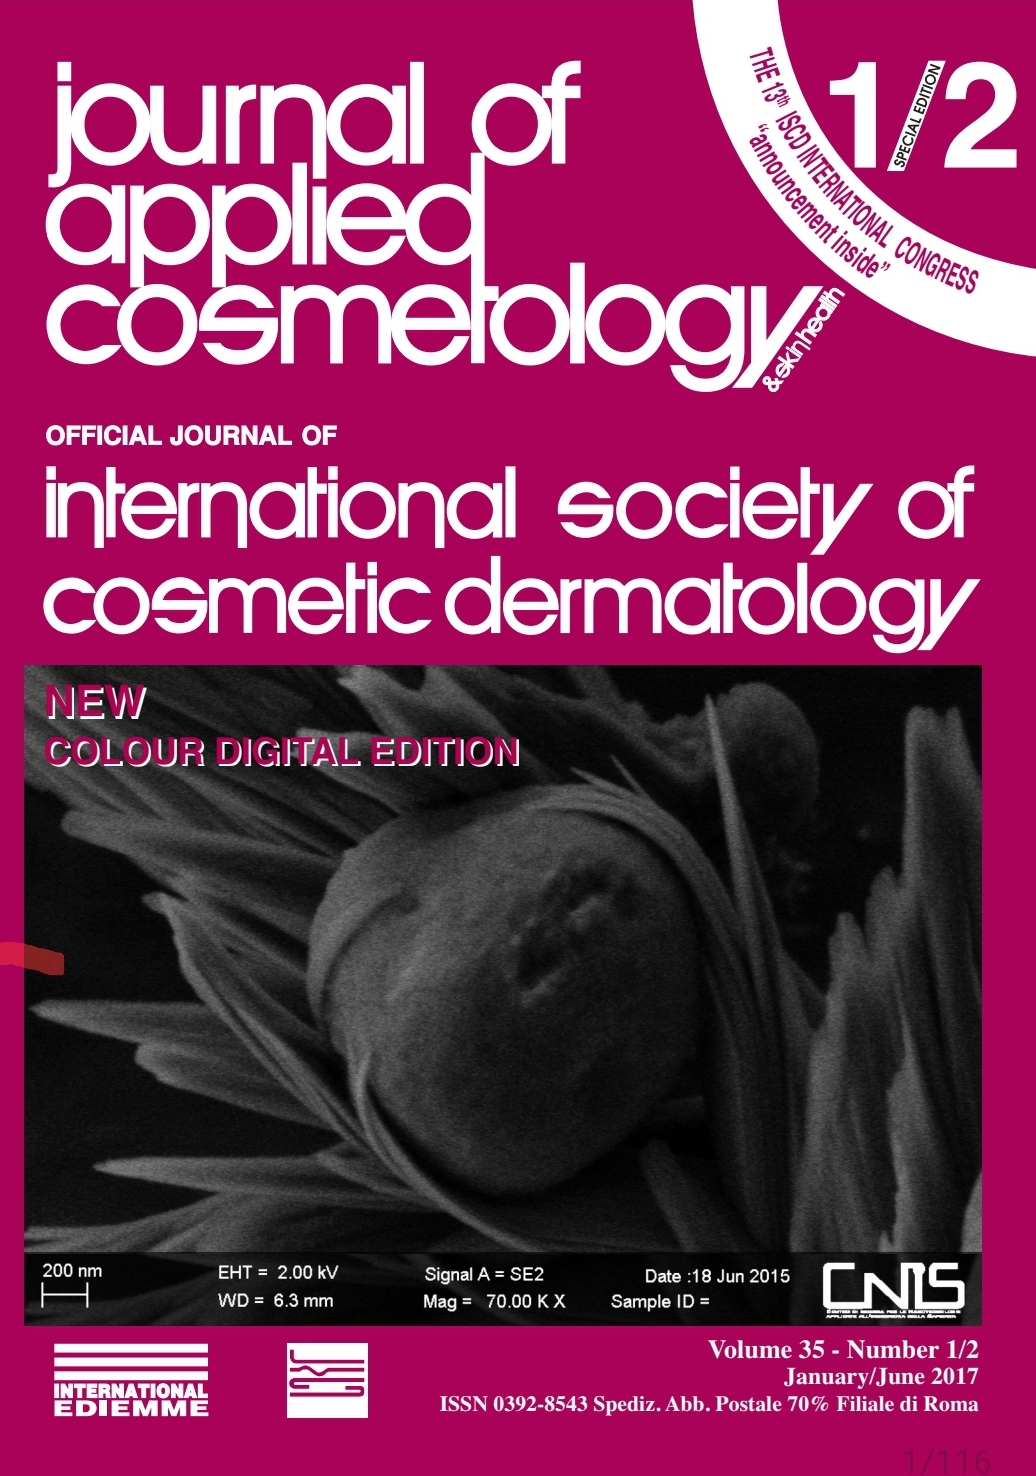 					View Vol. 35 No. 1/2 (2017): Journal of Applied Cosmetology
				